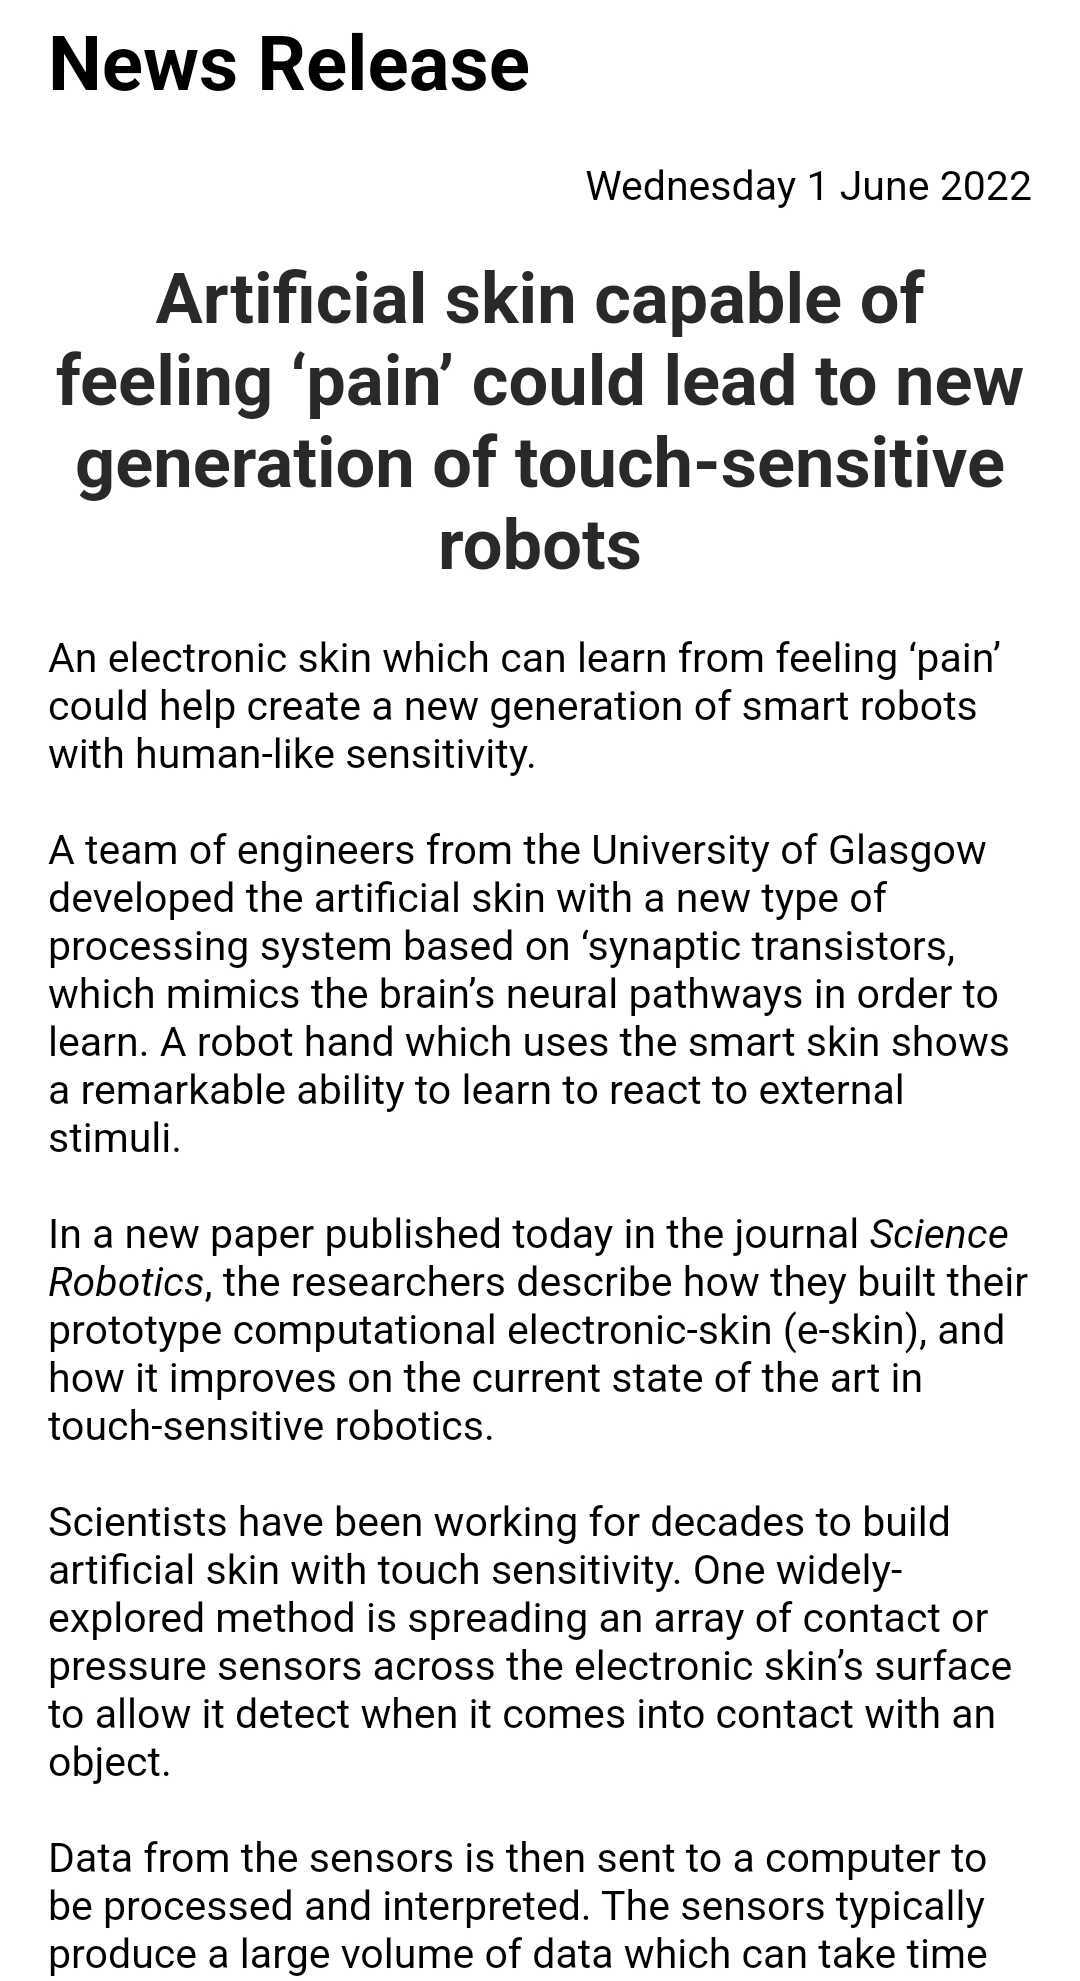 Artificial skin capable of feeling ‘pain’ could lead to new generation of touch-sensitive robots



An electronic skin which can learn from feeling ‘pain’ could help create a new generation of smart robots with human-like sensitivity. 



A team of engineers from the University of Glasgow developed the artificial skin with a new type of processing system based on ‘synaptic transistors, which mimics the brain’s neural pathways in order to learn. A robot hand which uses the smart skin shows a remarkable ability to learn to react to external stimuli. 



In a new paper published today in the journal Science Robotics, the researchers describe how they built their prototype computational electronic-skin (e-skin), and how it improves on the current state of the art in touch-sensitive robotics.



Scientists have been working for decades to build artificial skin with touch sensitivity. One widely-explored method is spreading an array of contact or pressure sensors across the electronic skin’s surface to allow it detect when it comes into contact with an object.



Data from the sensors is then sent to a computer to be processed and interpreted. The sensors typically produce a large volume of data which can take tim